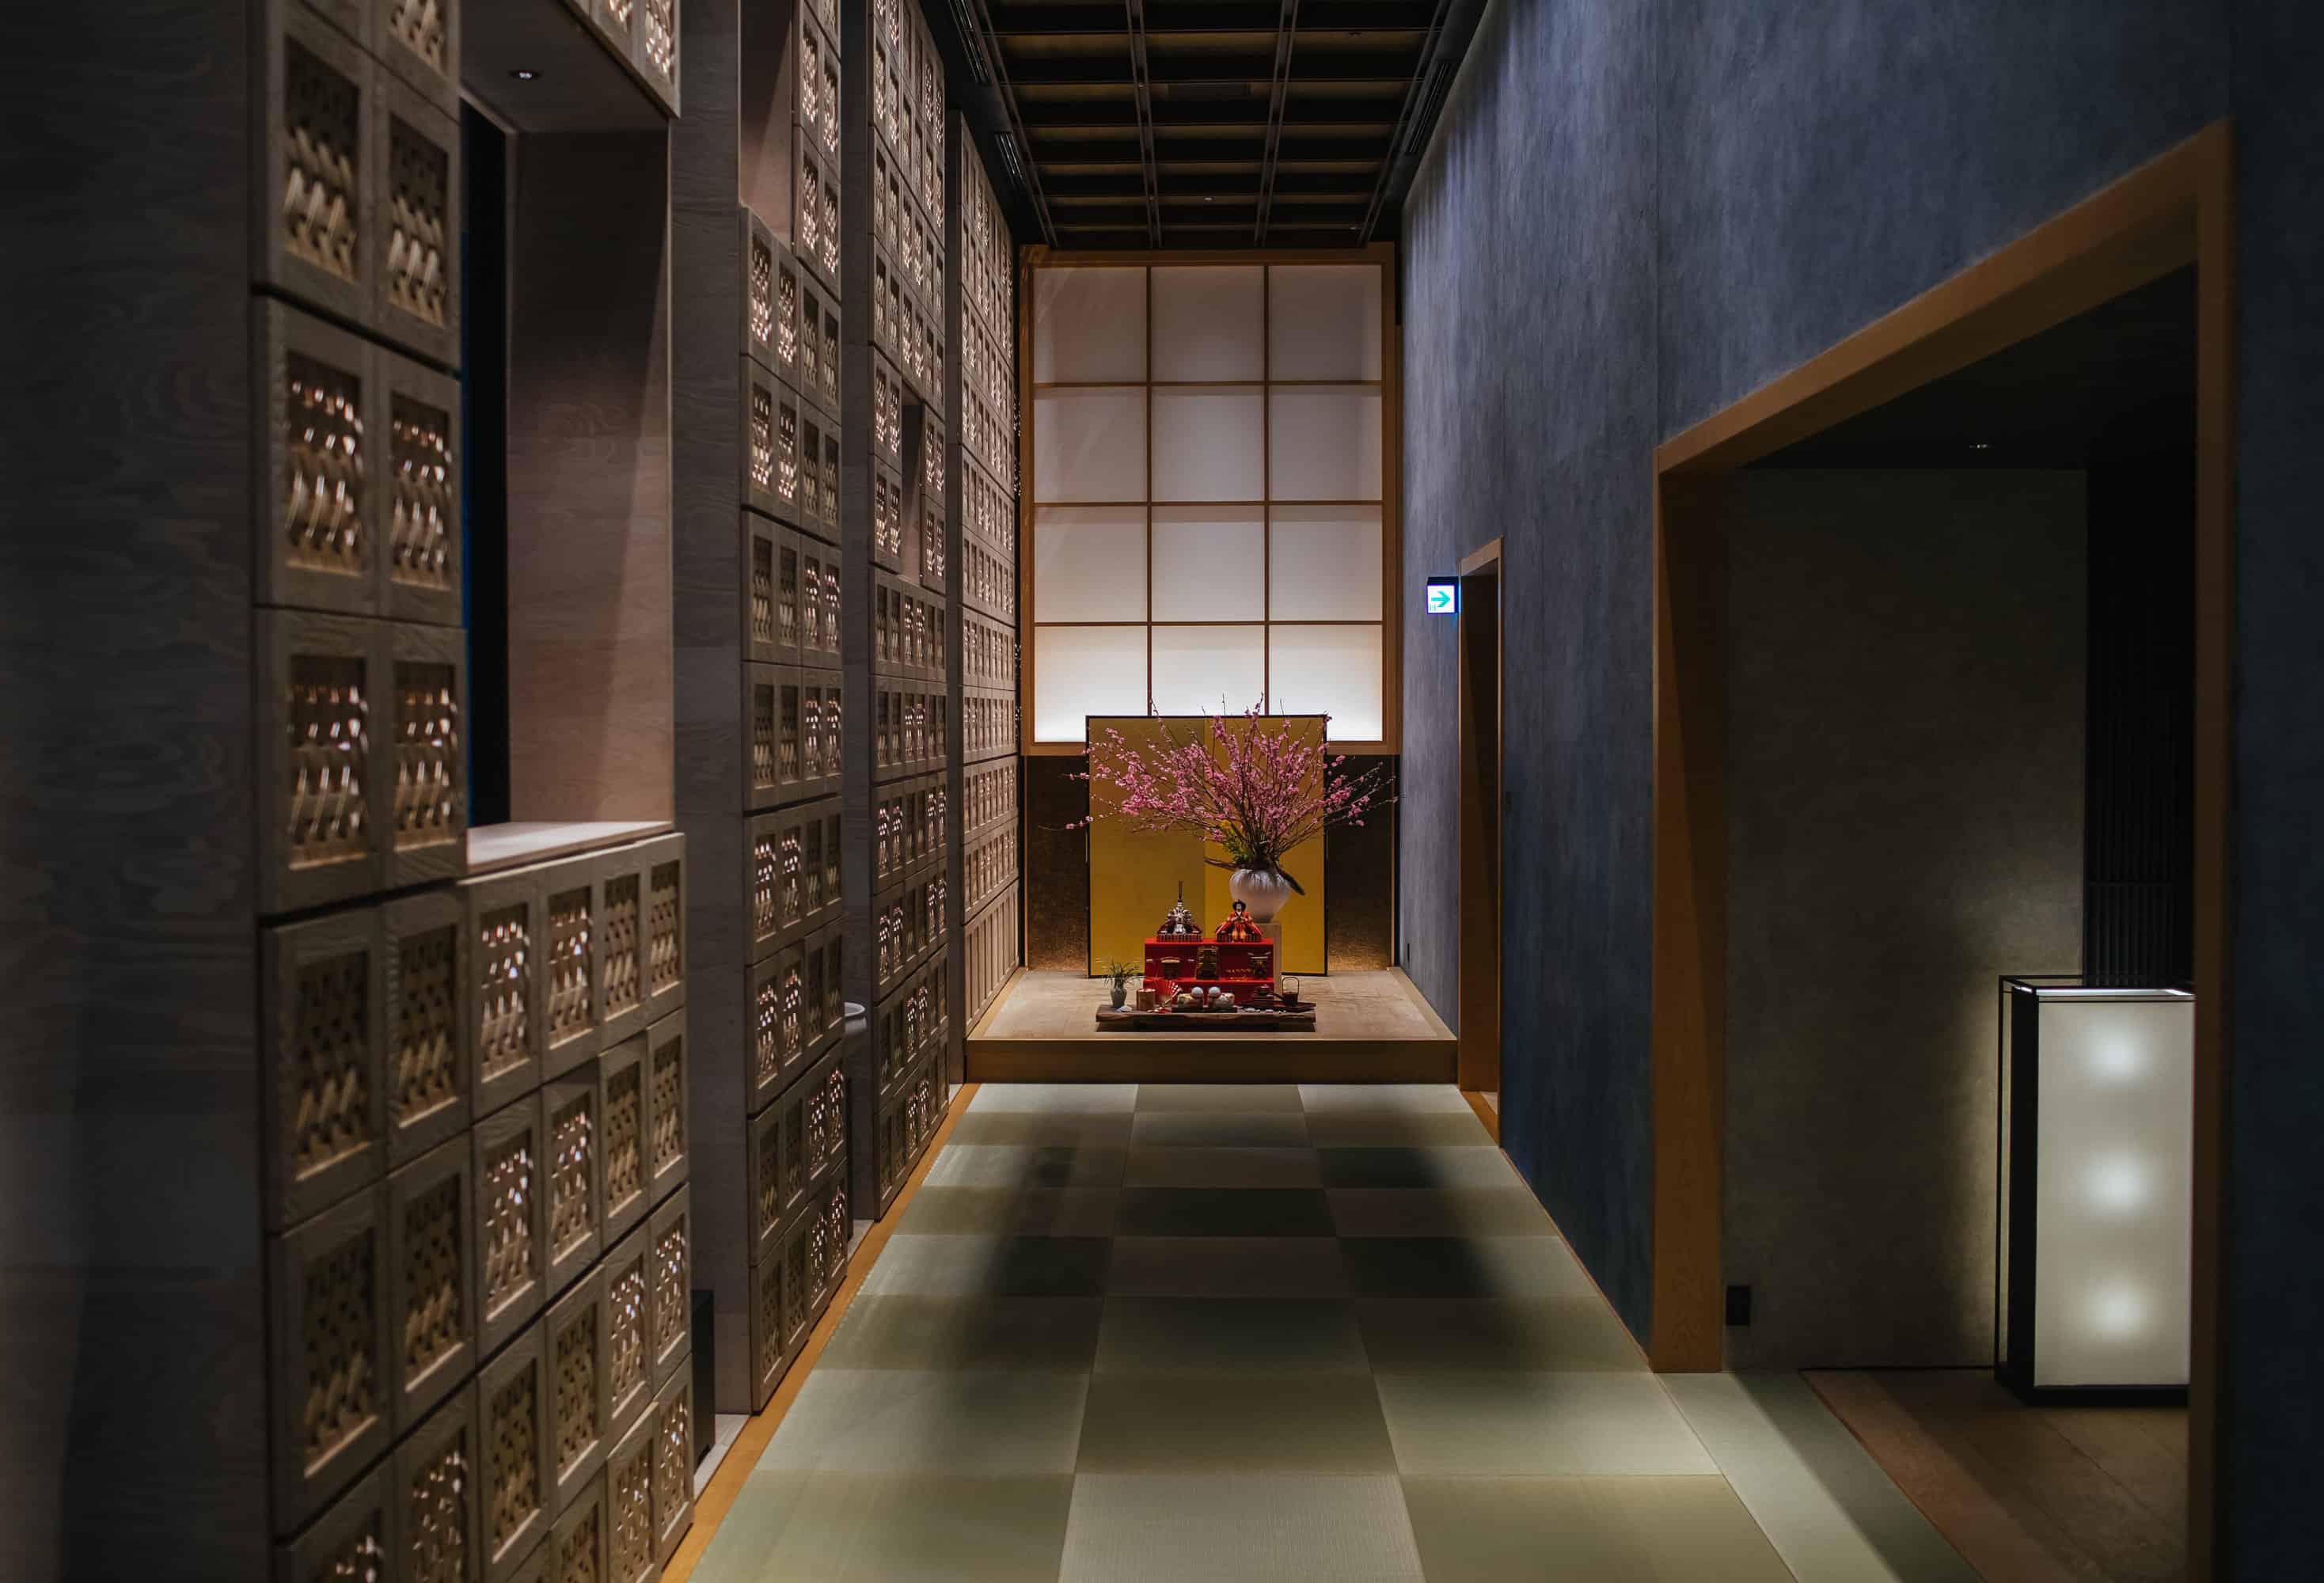 How Japan is Reinventing and Preserving the Ryokan Experience